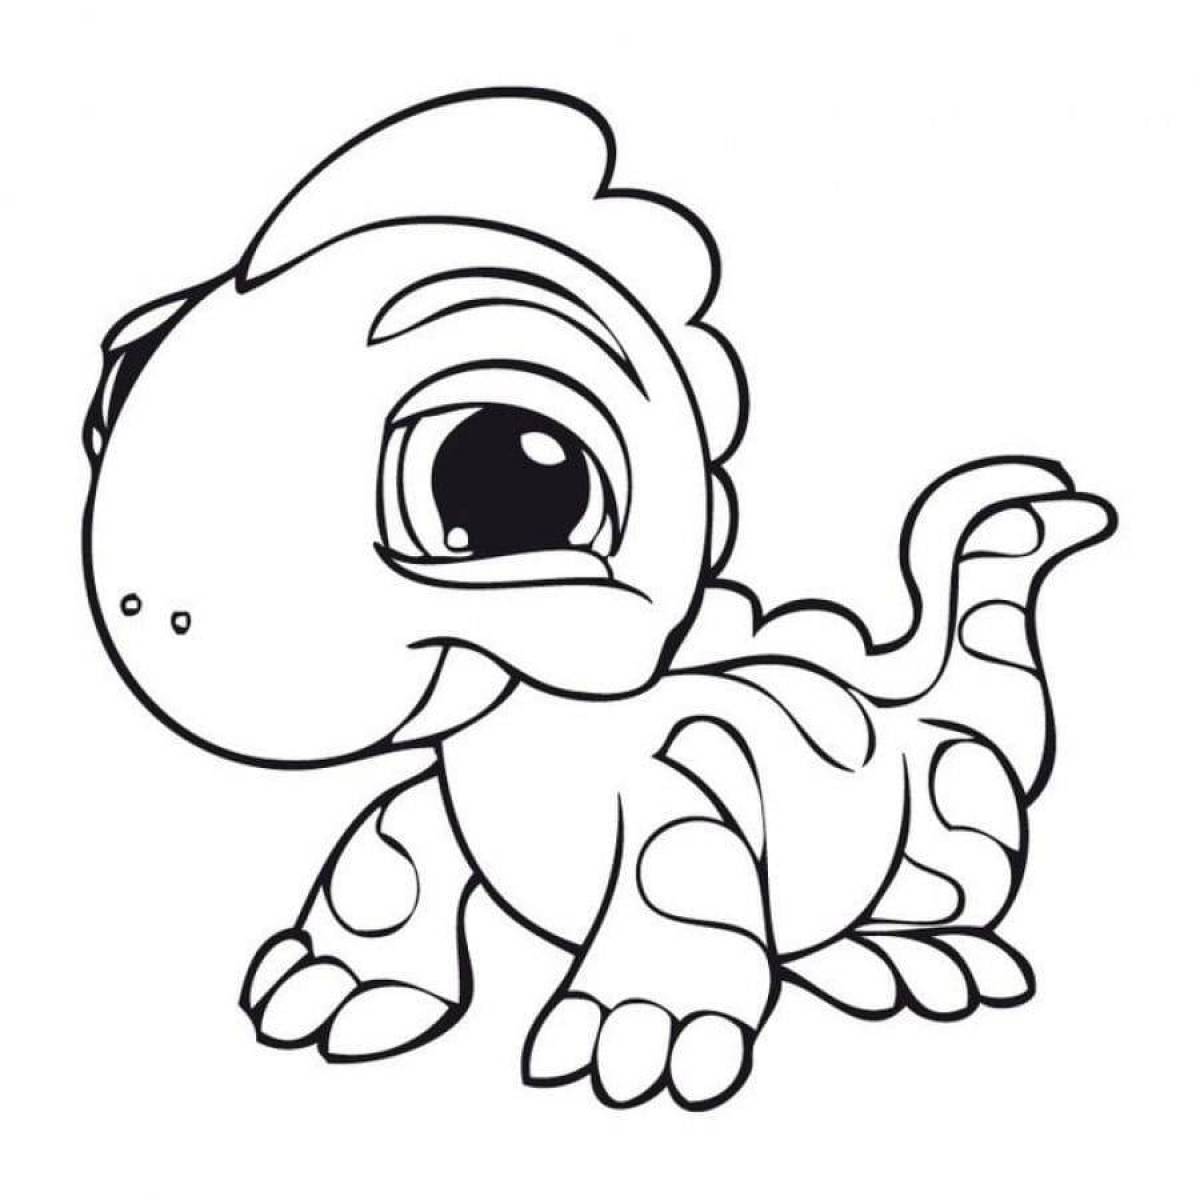 Amazing coloring pages cute animals